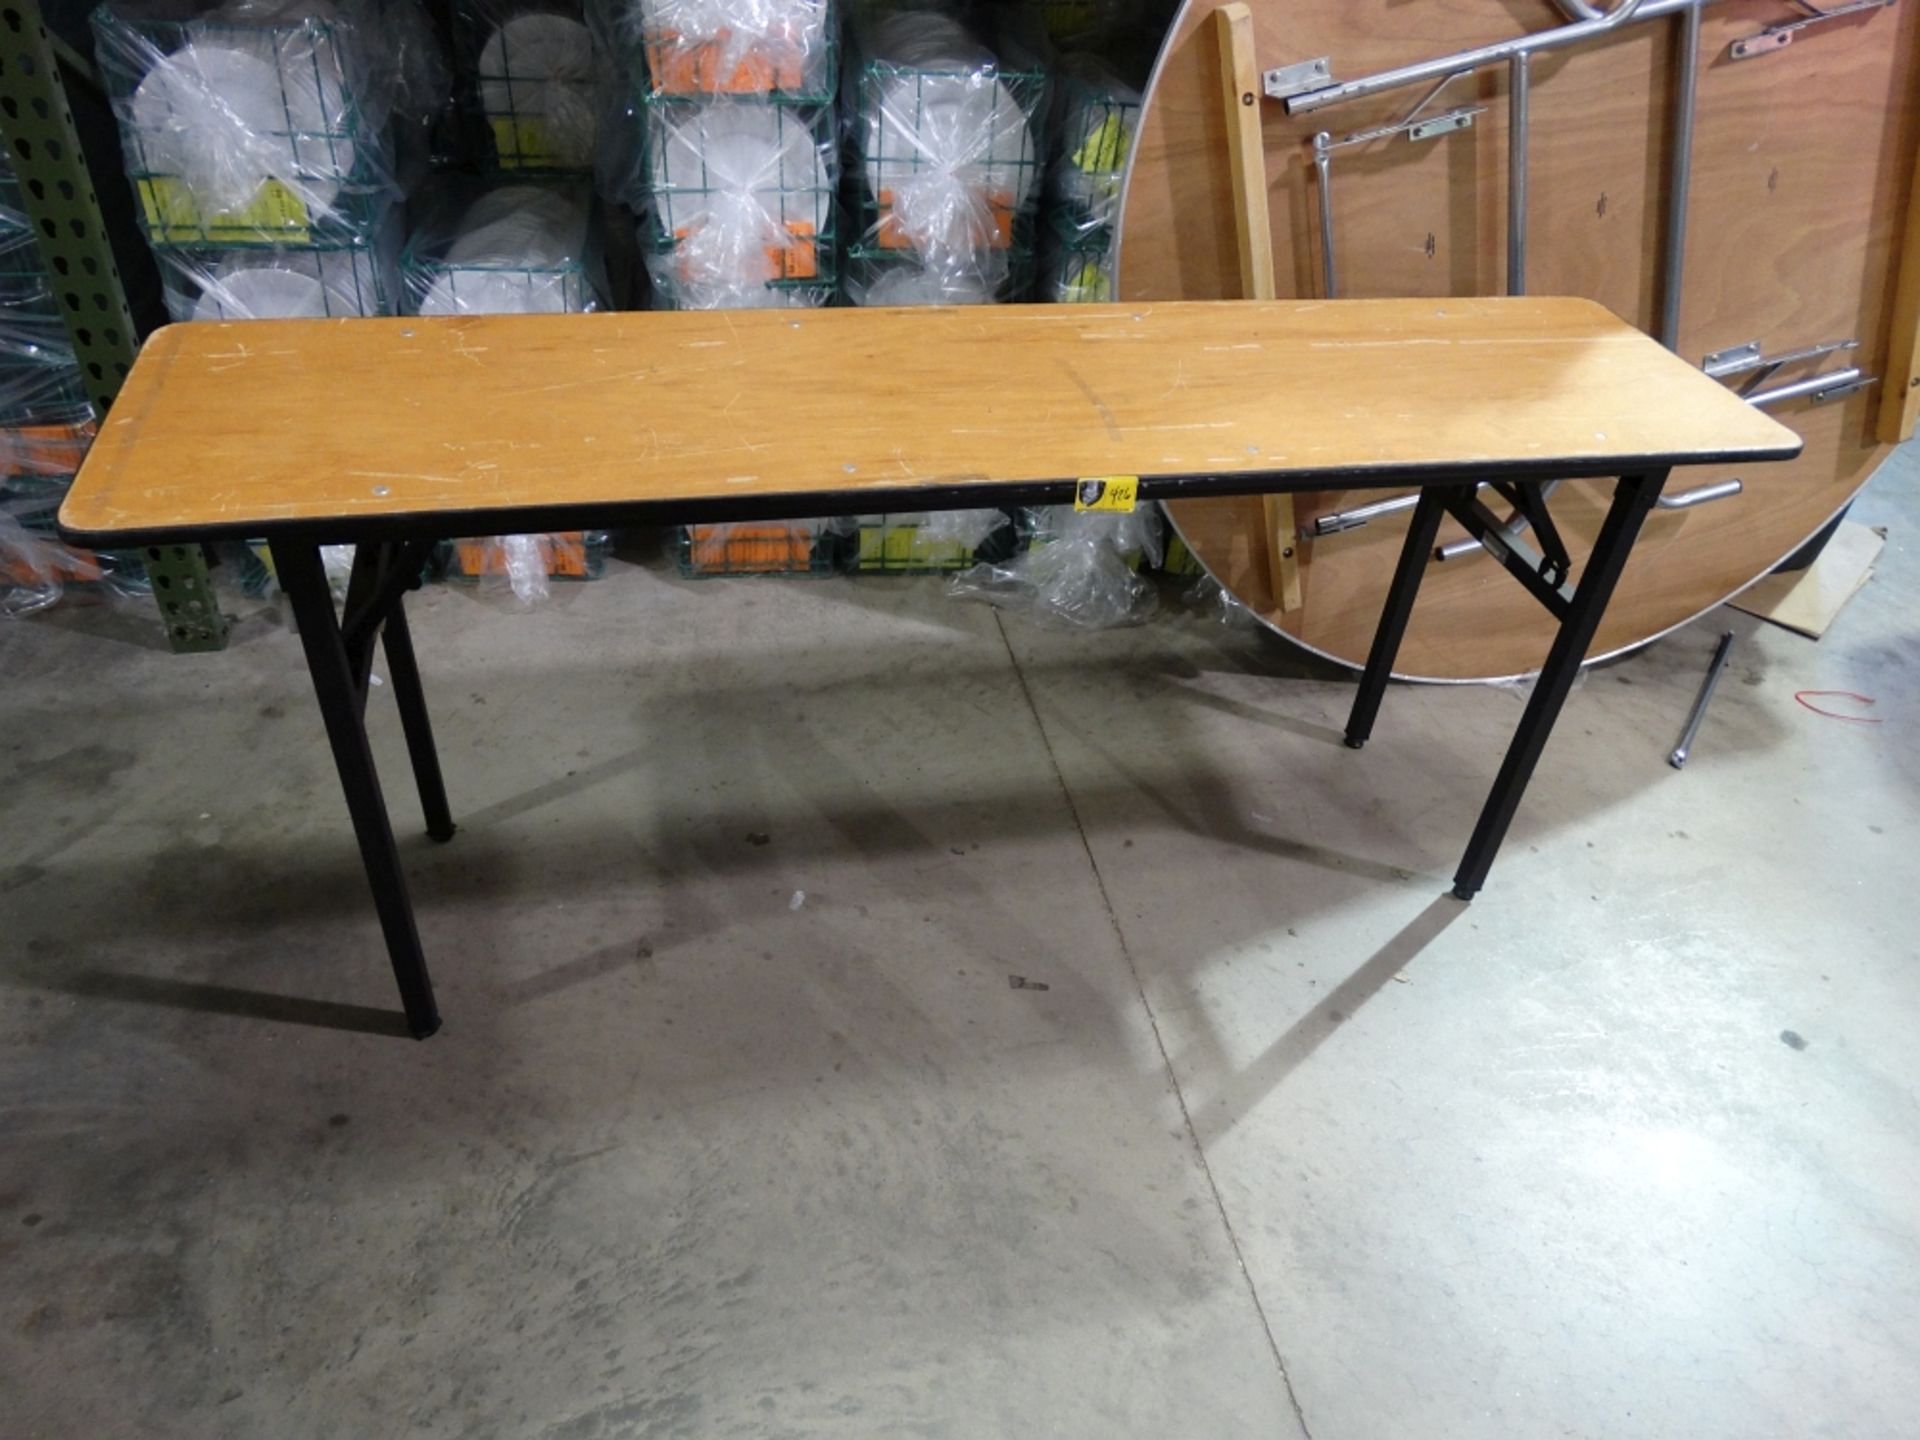 Table, 18" x 6' - Classroom Plywood Top